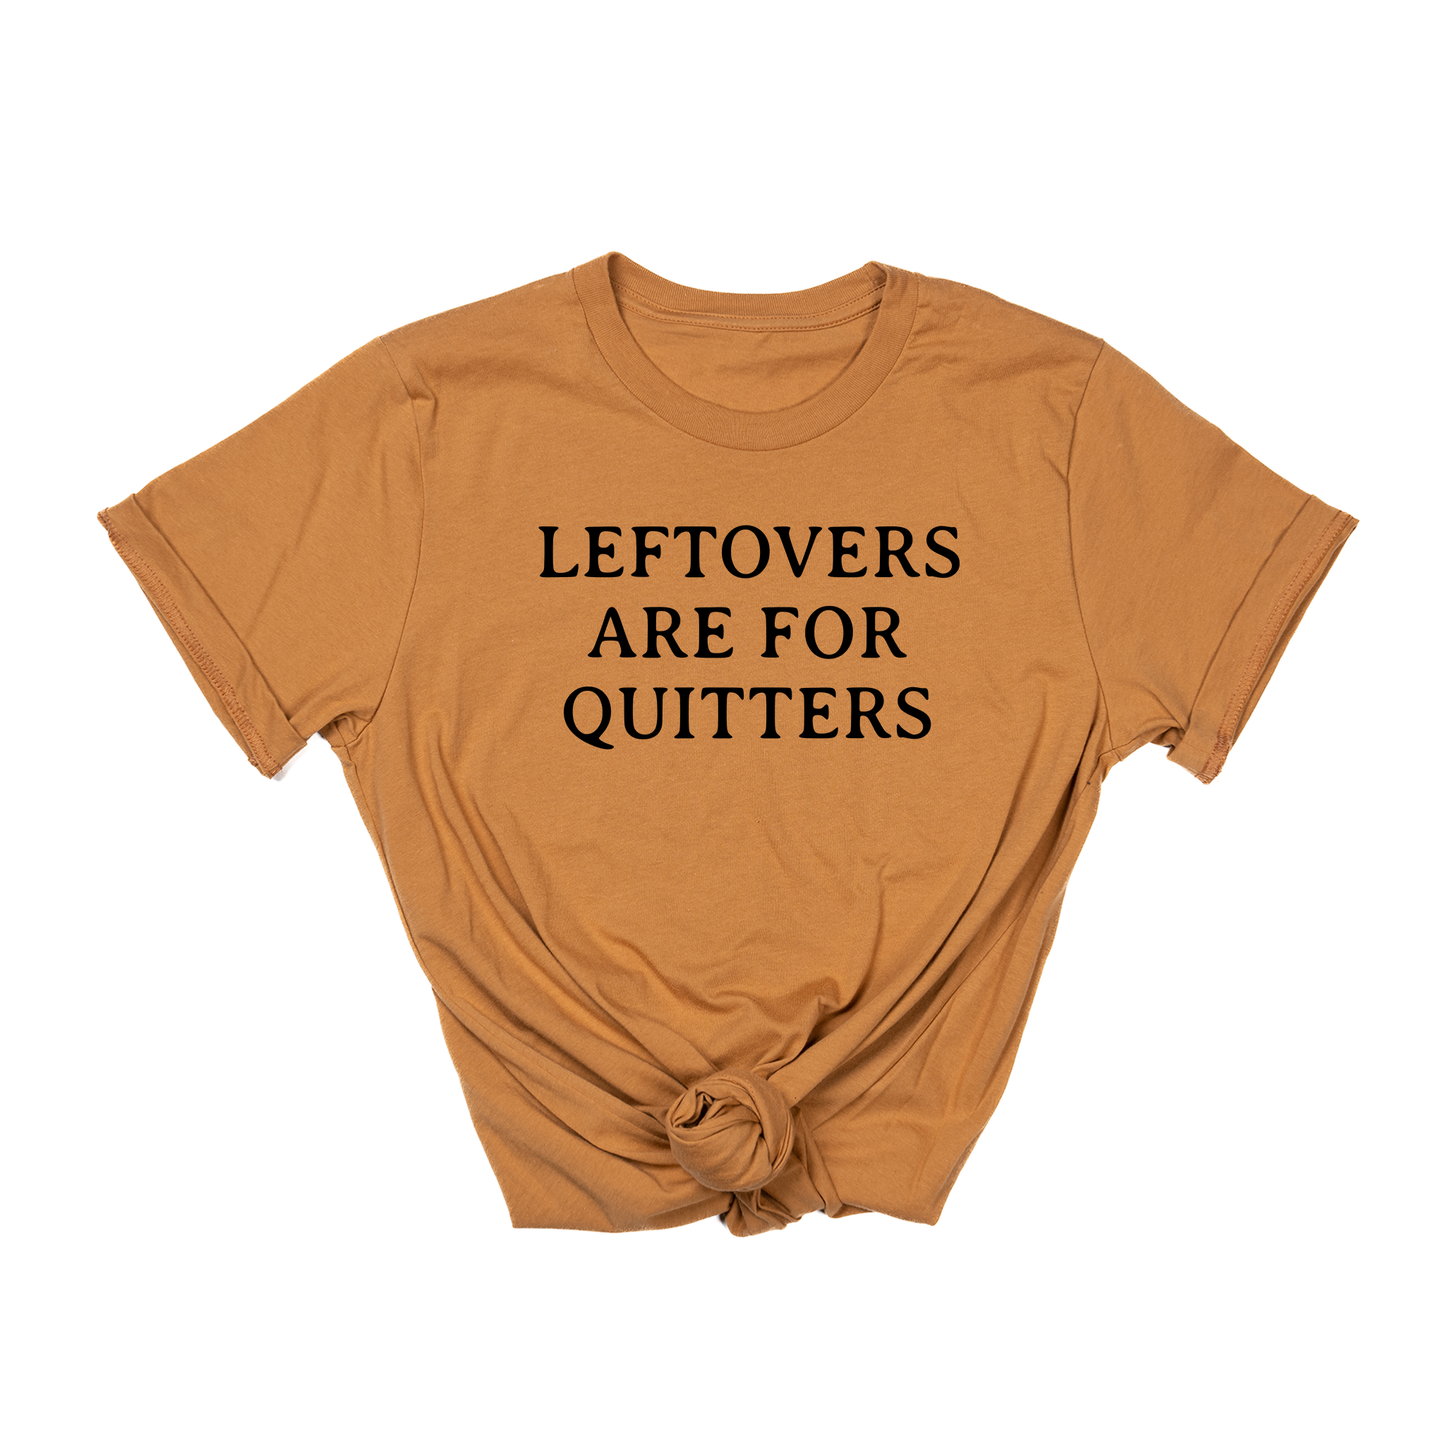 Leftovers are for Quitters (Black) - Tee (Camel)